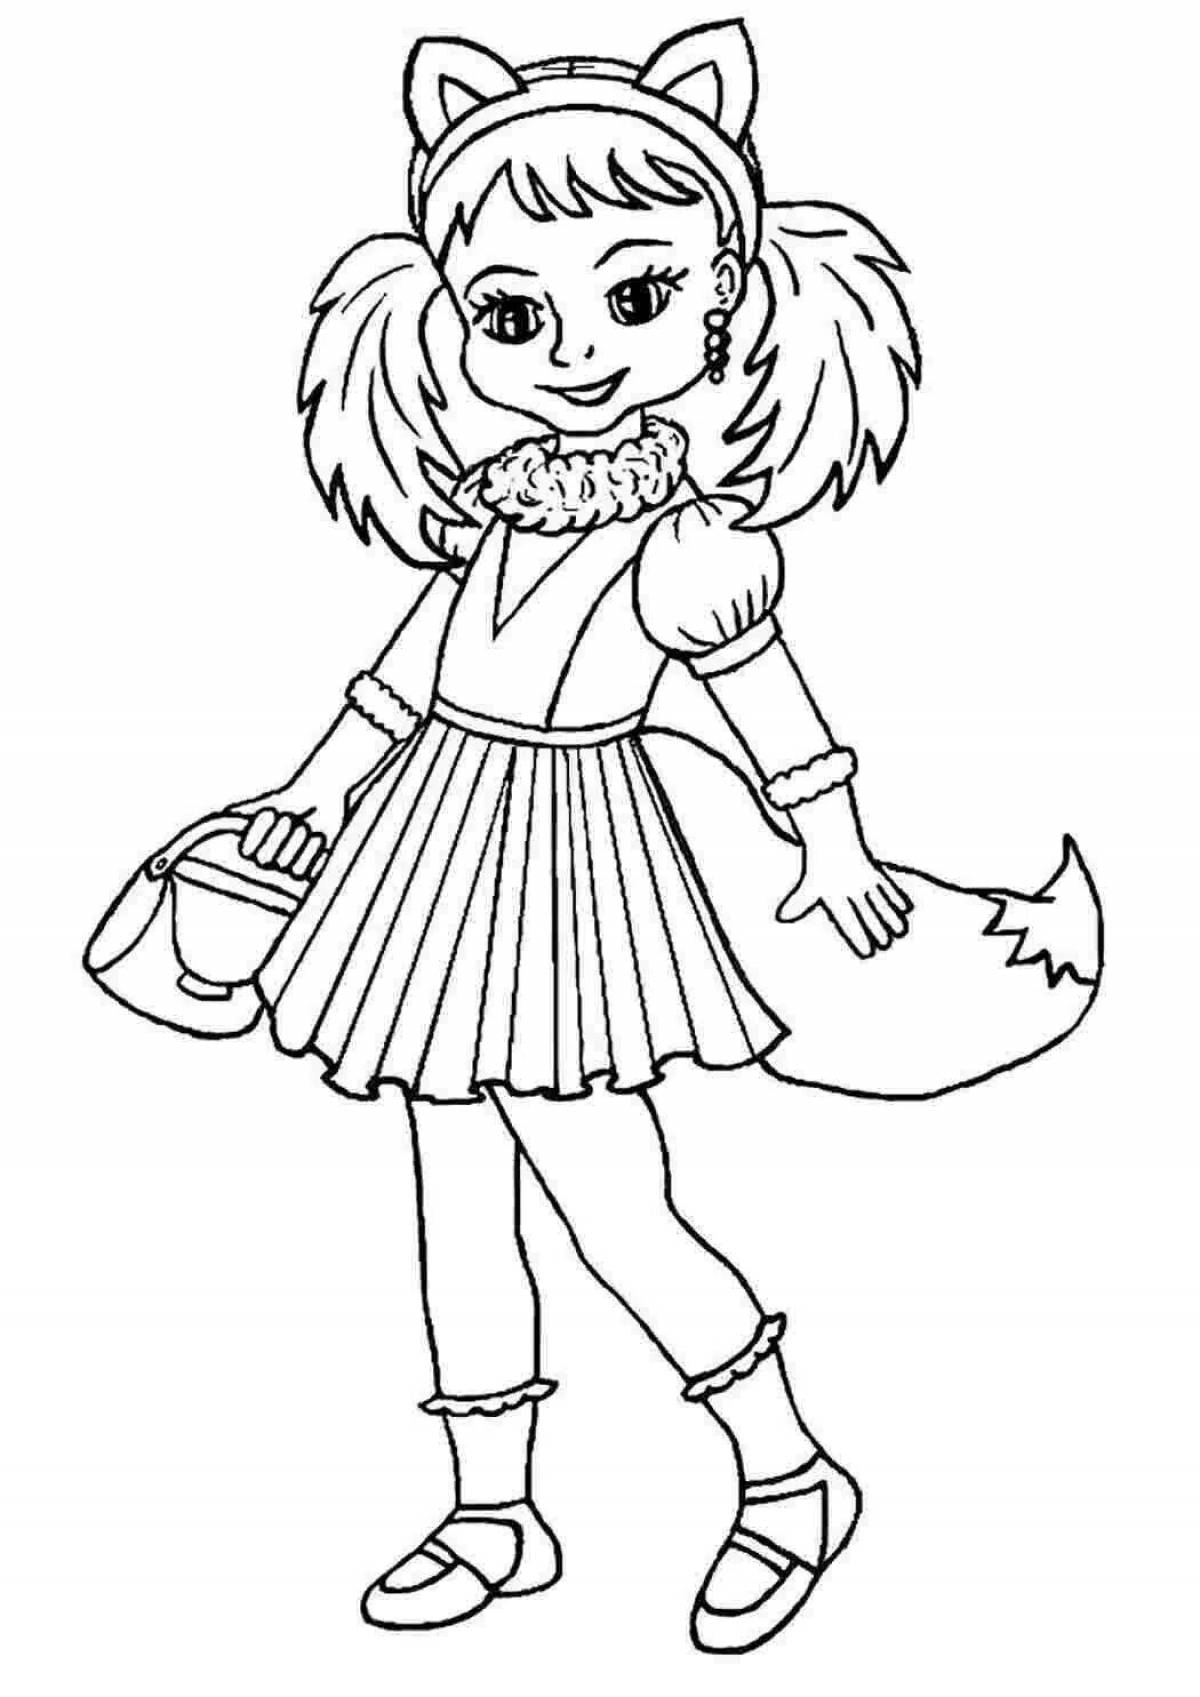 Playful costume coloring page